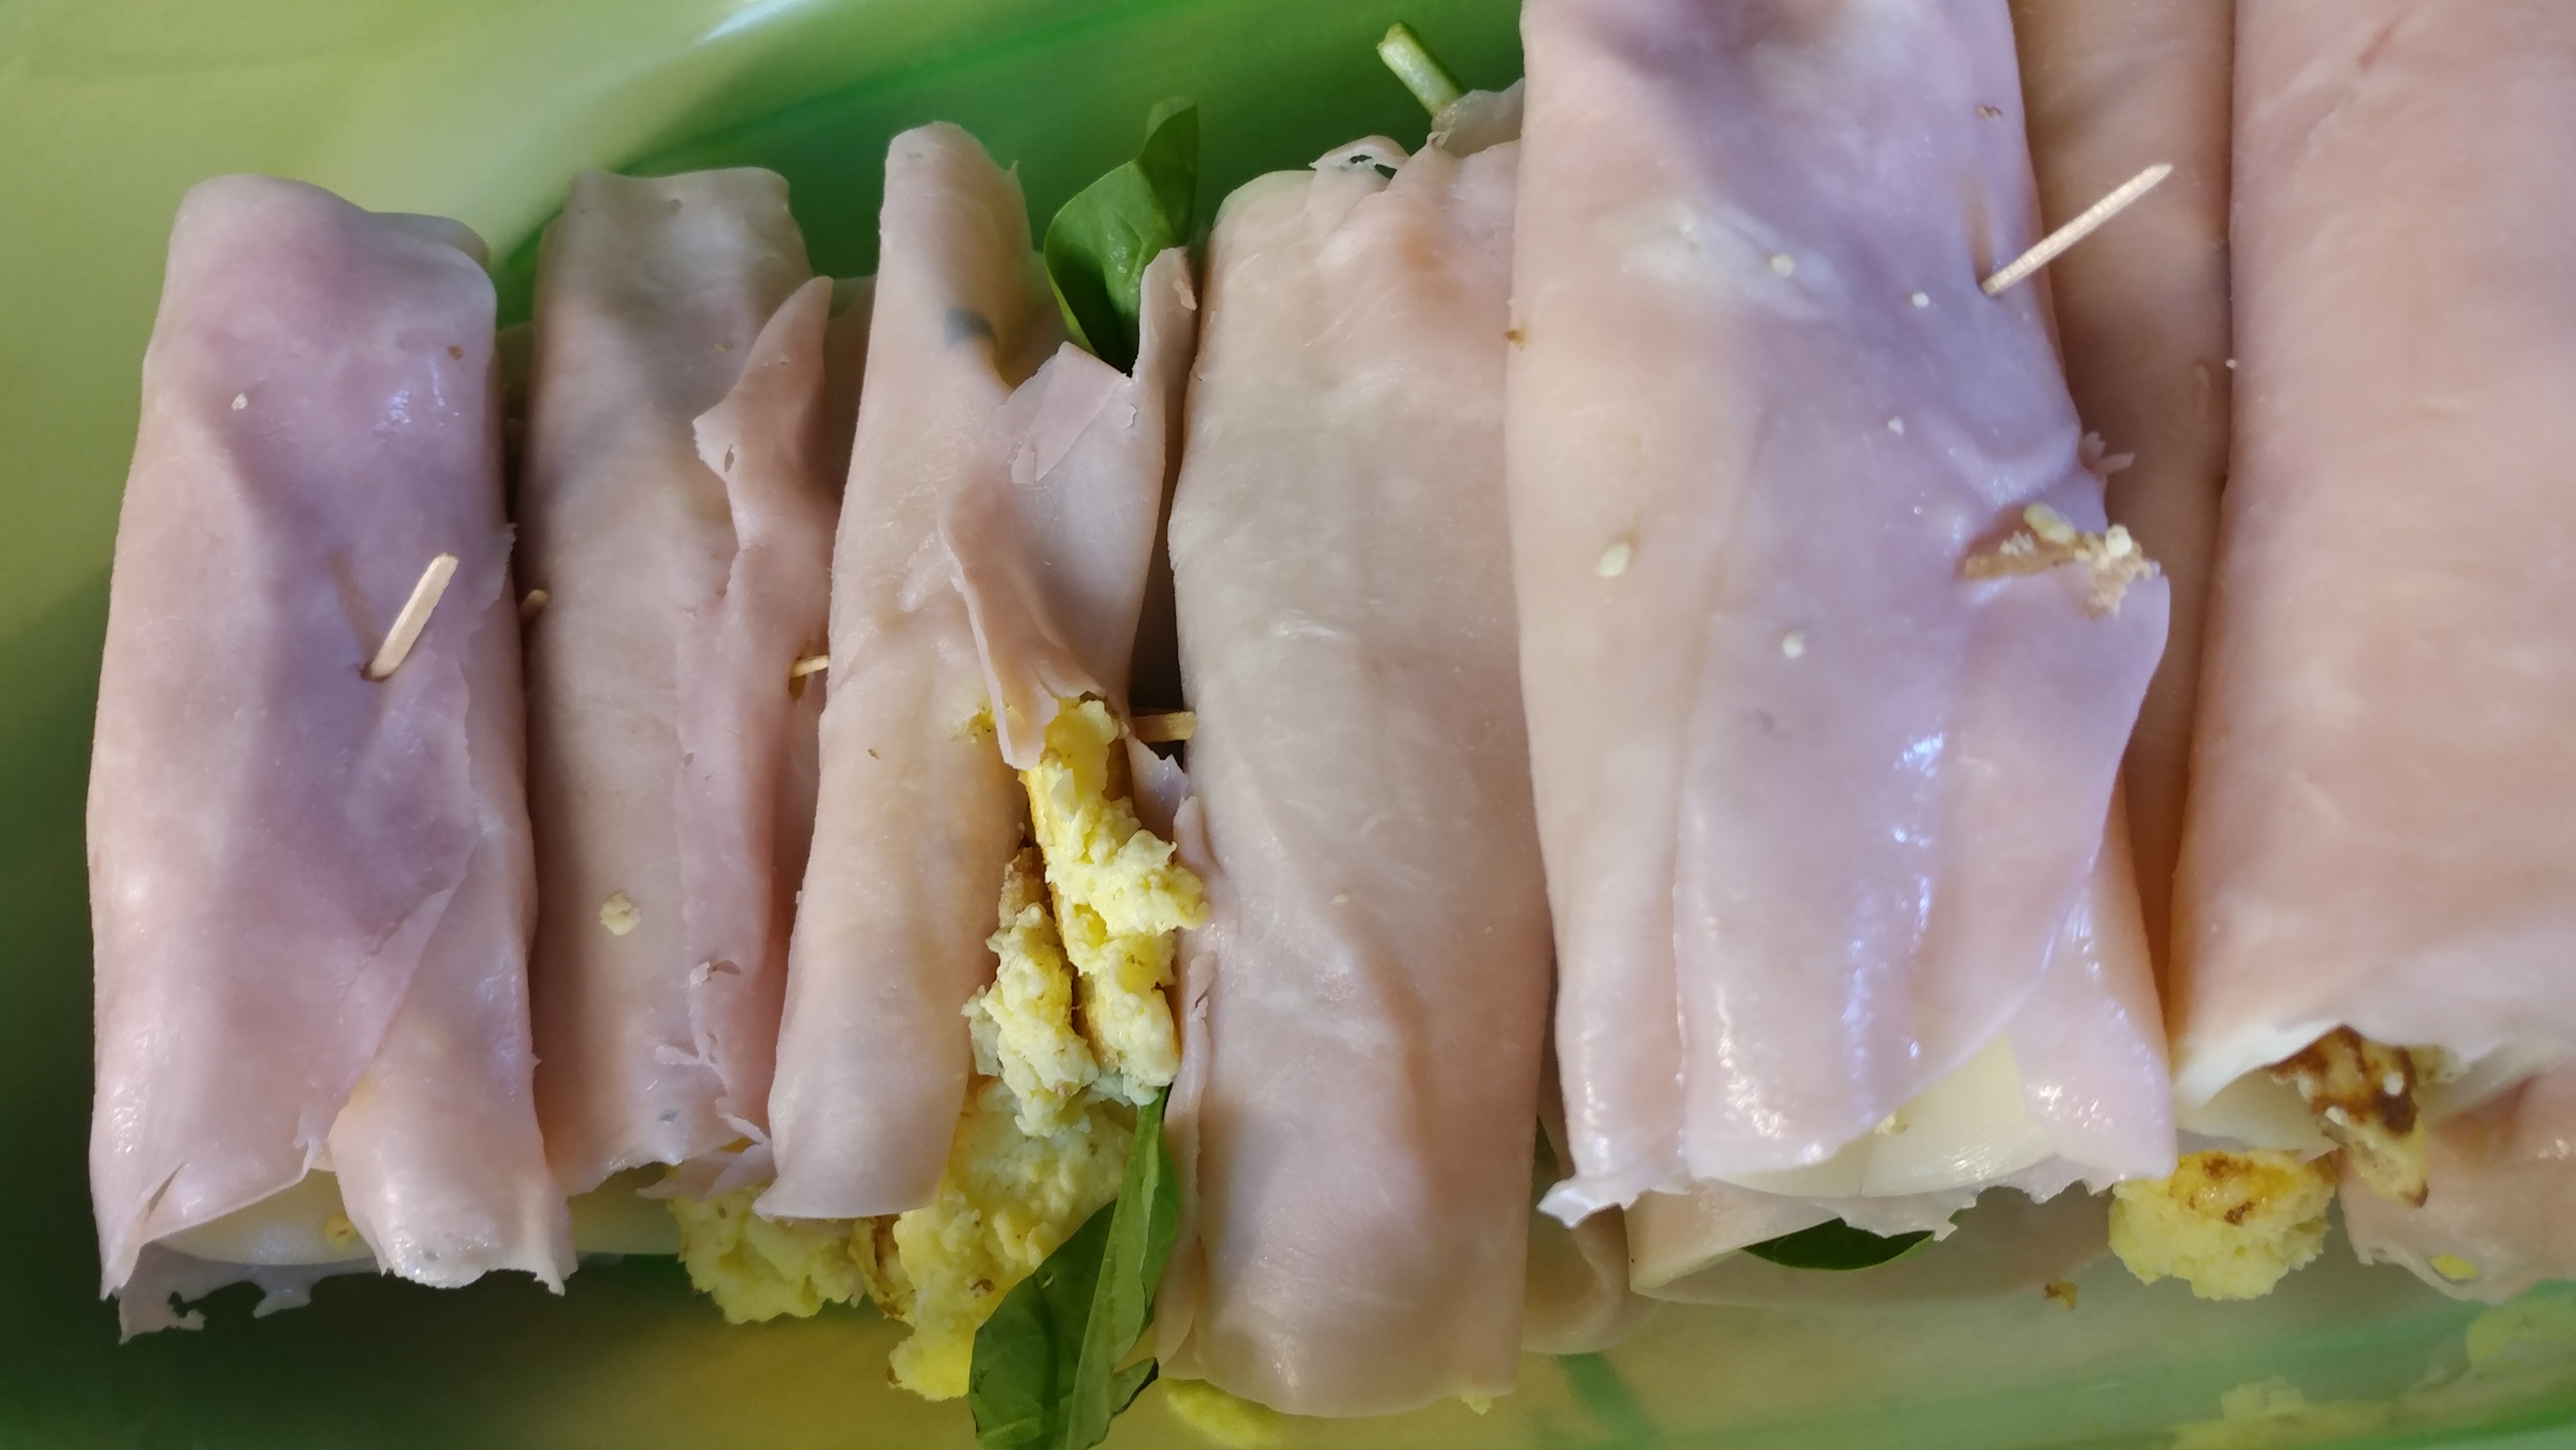 ham egg and cheese roll-ups . family friendly low carb meal prep ideas for breakfast 